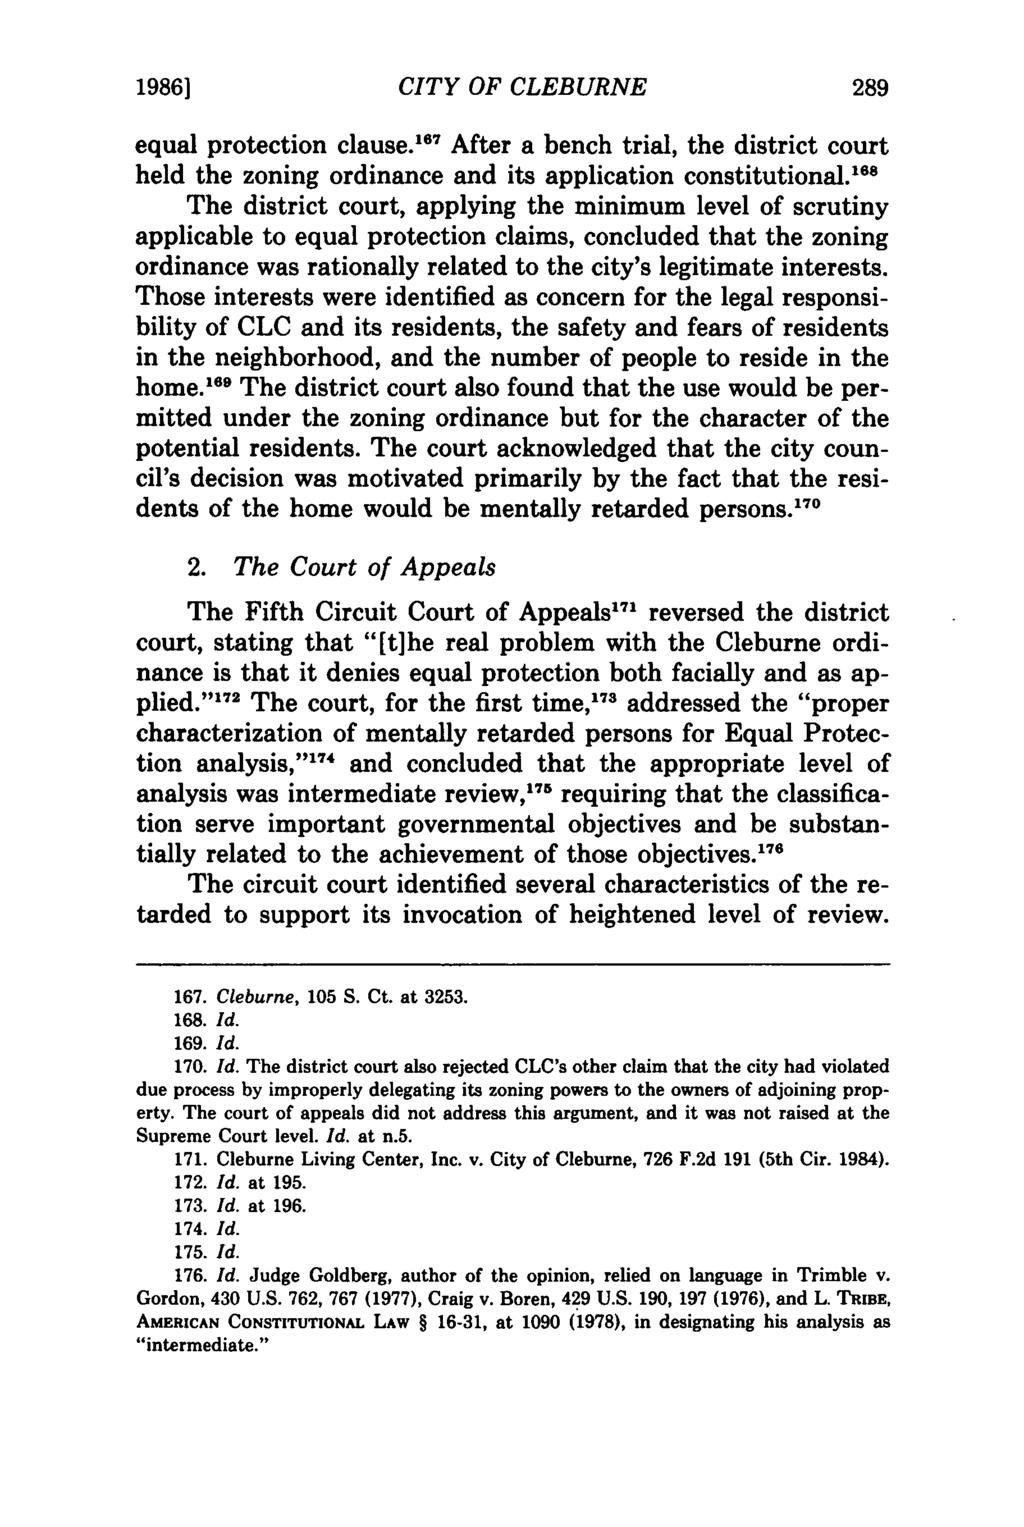 1986] CITY OF CLEBURNE equal protection clause. 1 67 After a bench trial, the district court held the zoning ordinance and its application constitutional.